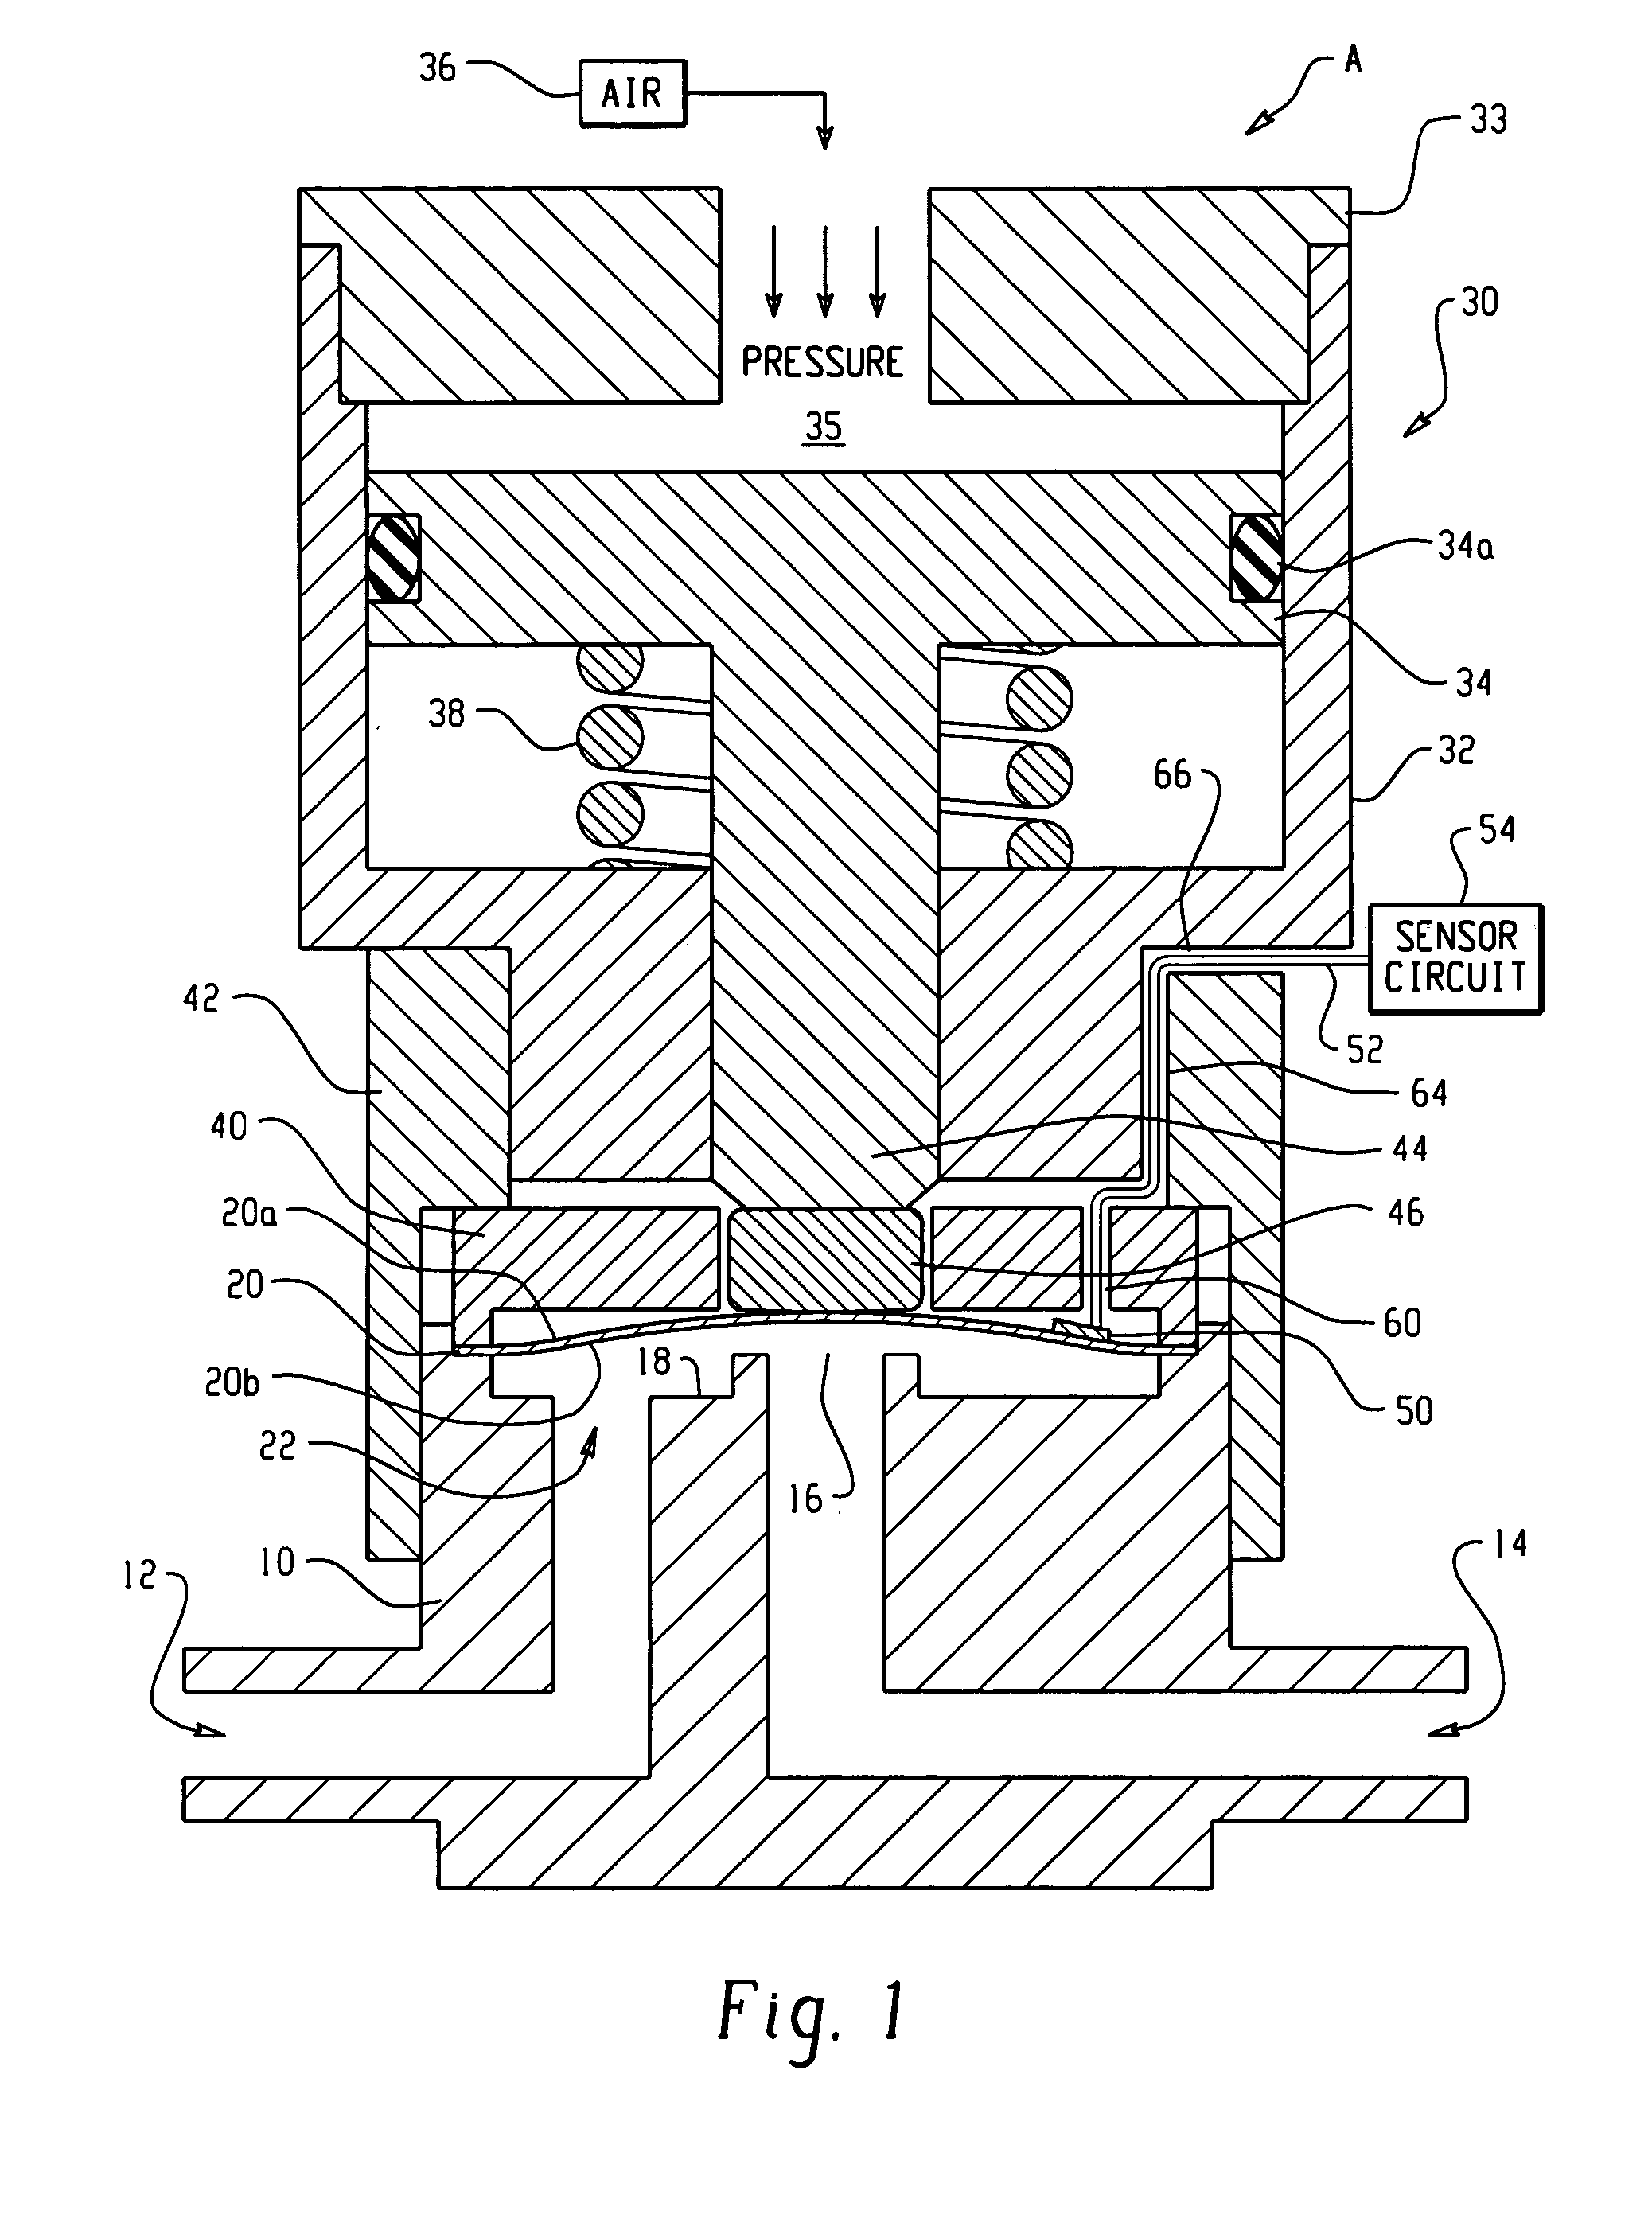 Diaphragm monitoring for flow control devices